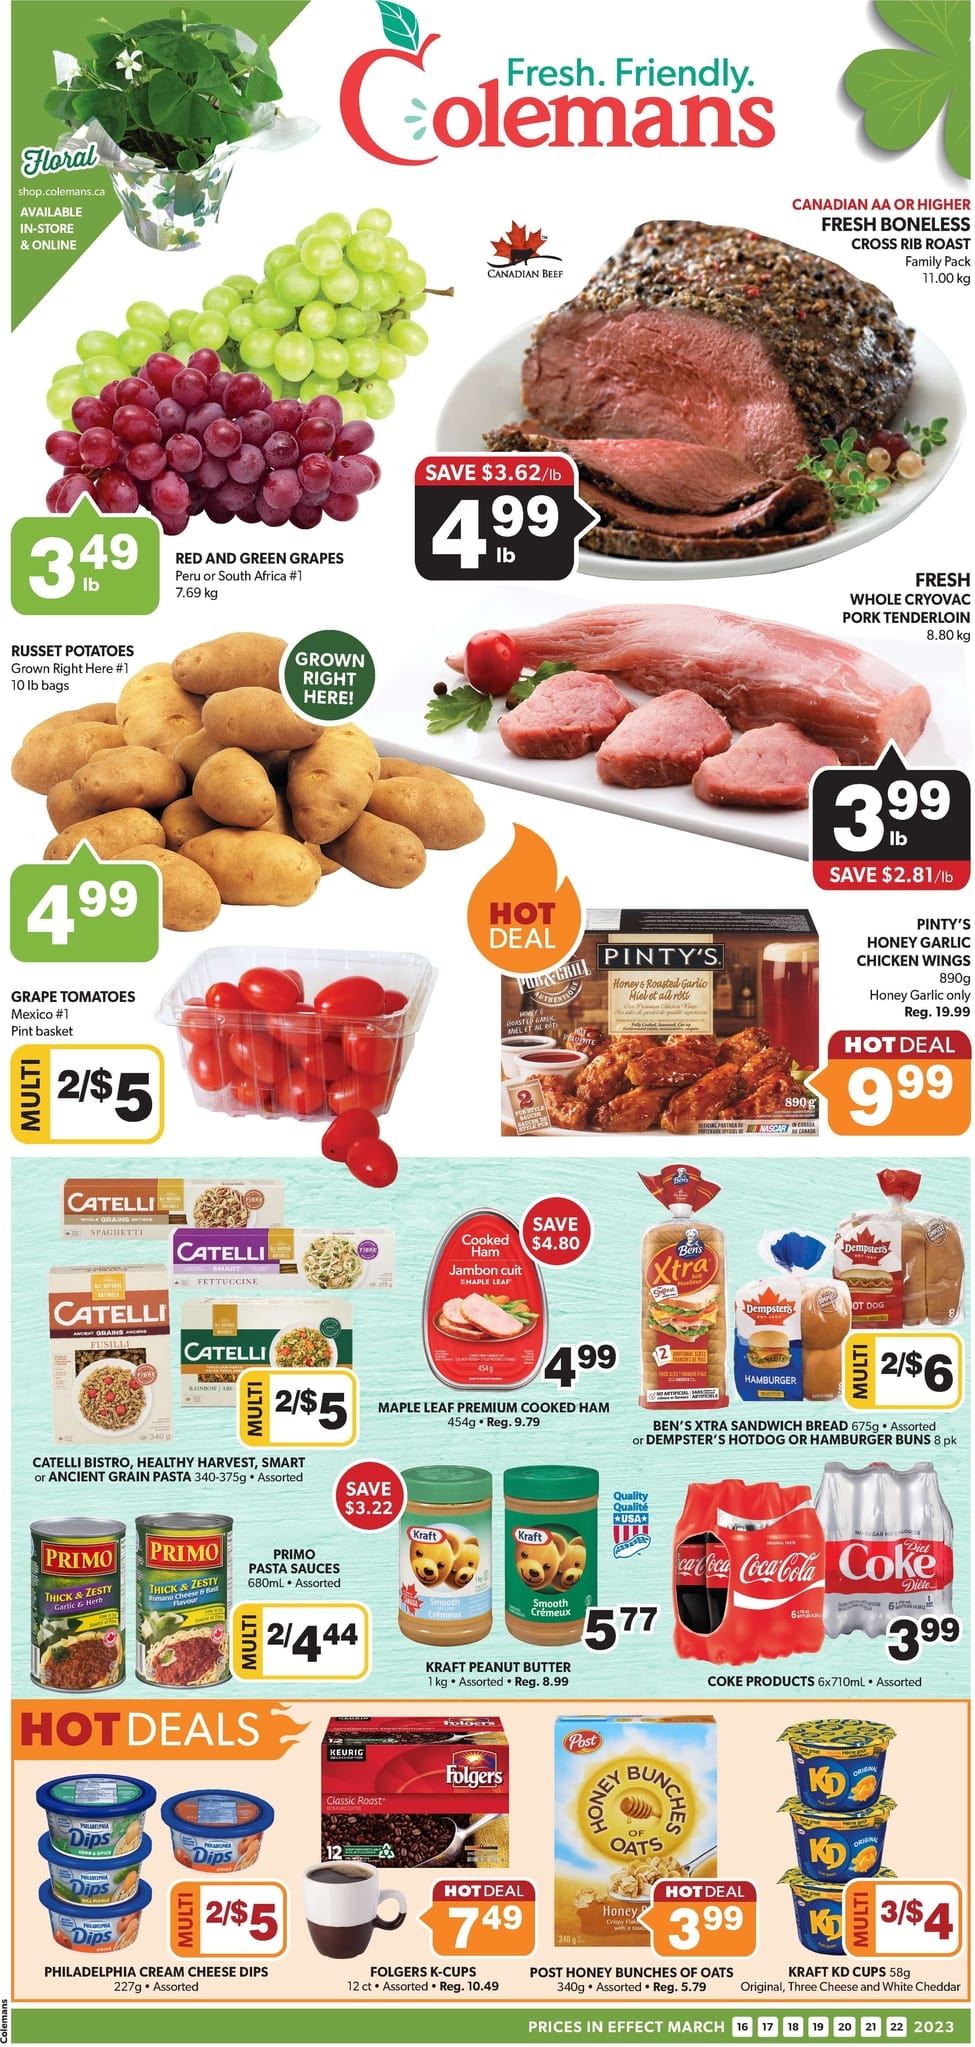 Colemans - Weekly Flyer Specials - Page 1